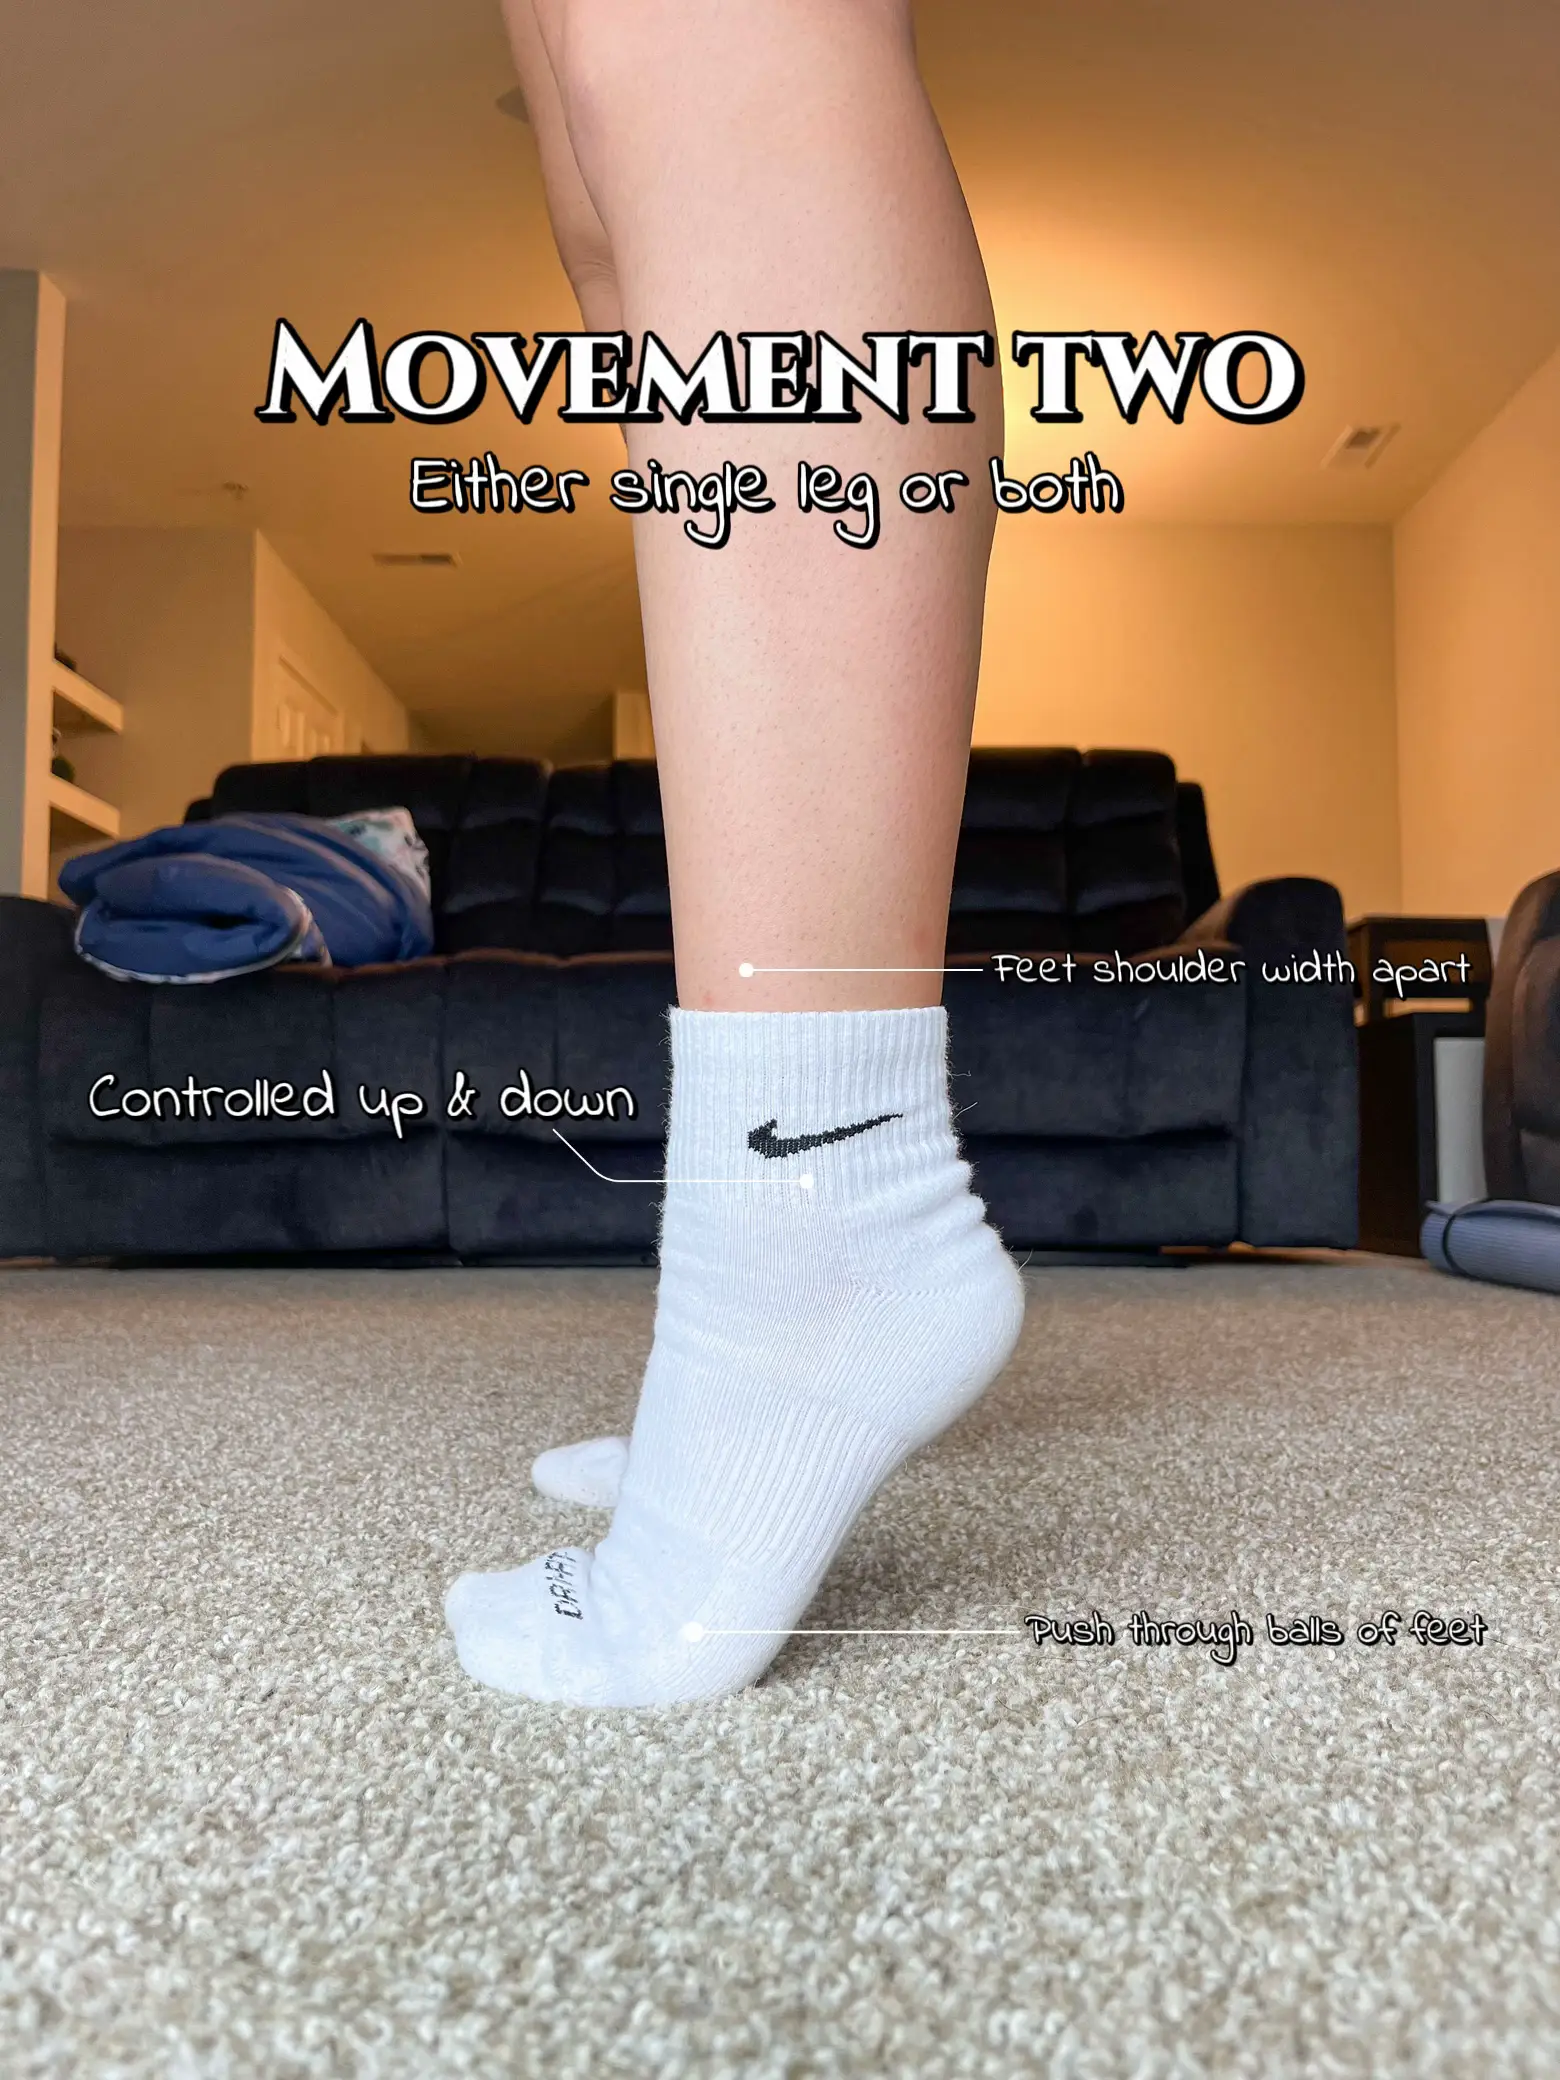 Get Ready To Move Easy In New Open Toe Dance Socks - BetterMe